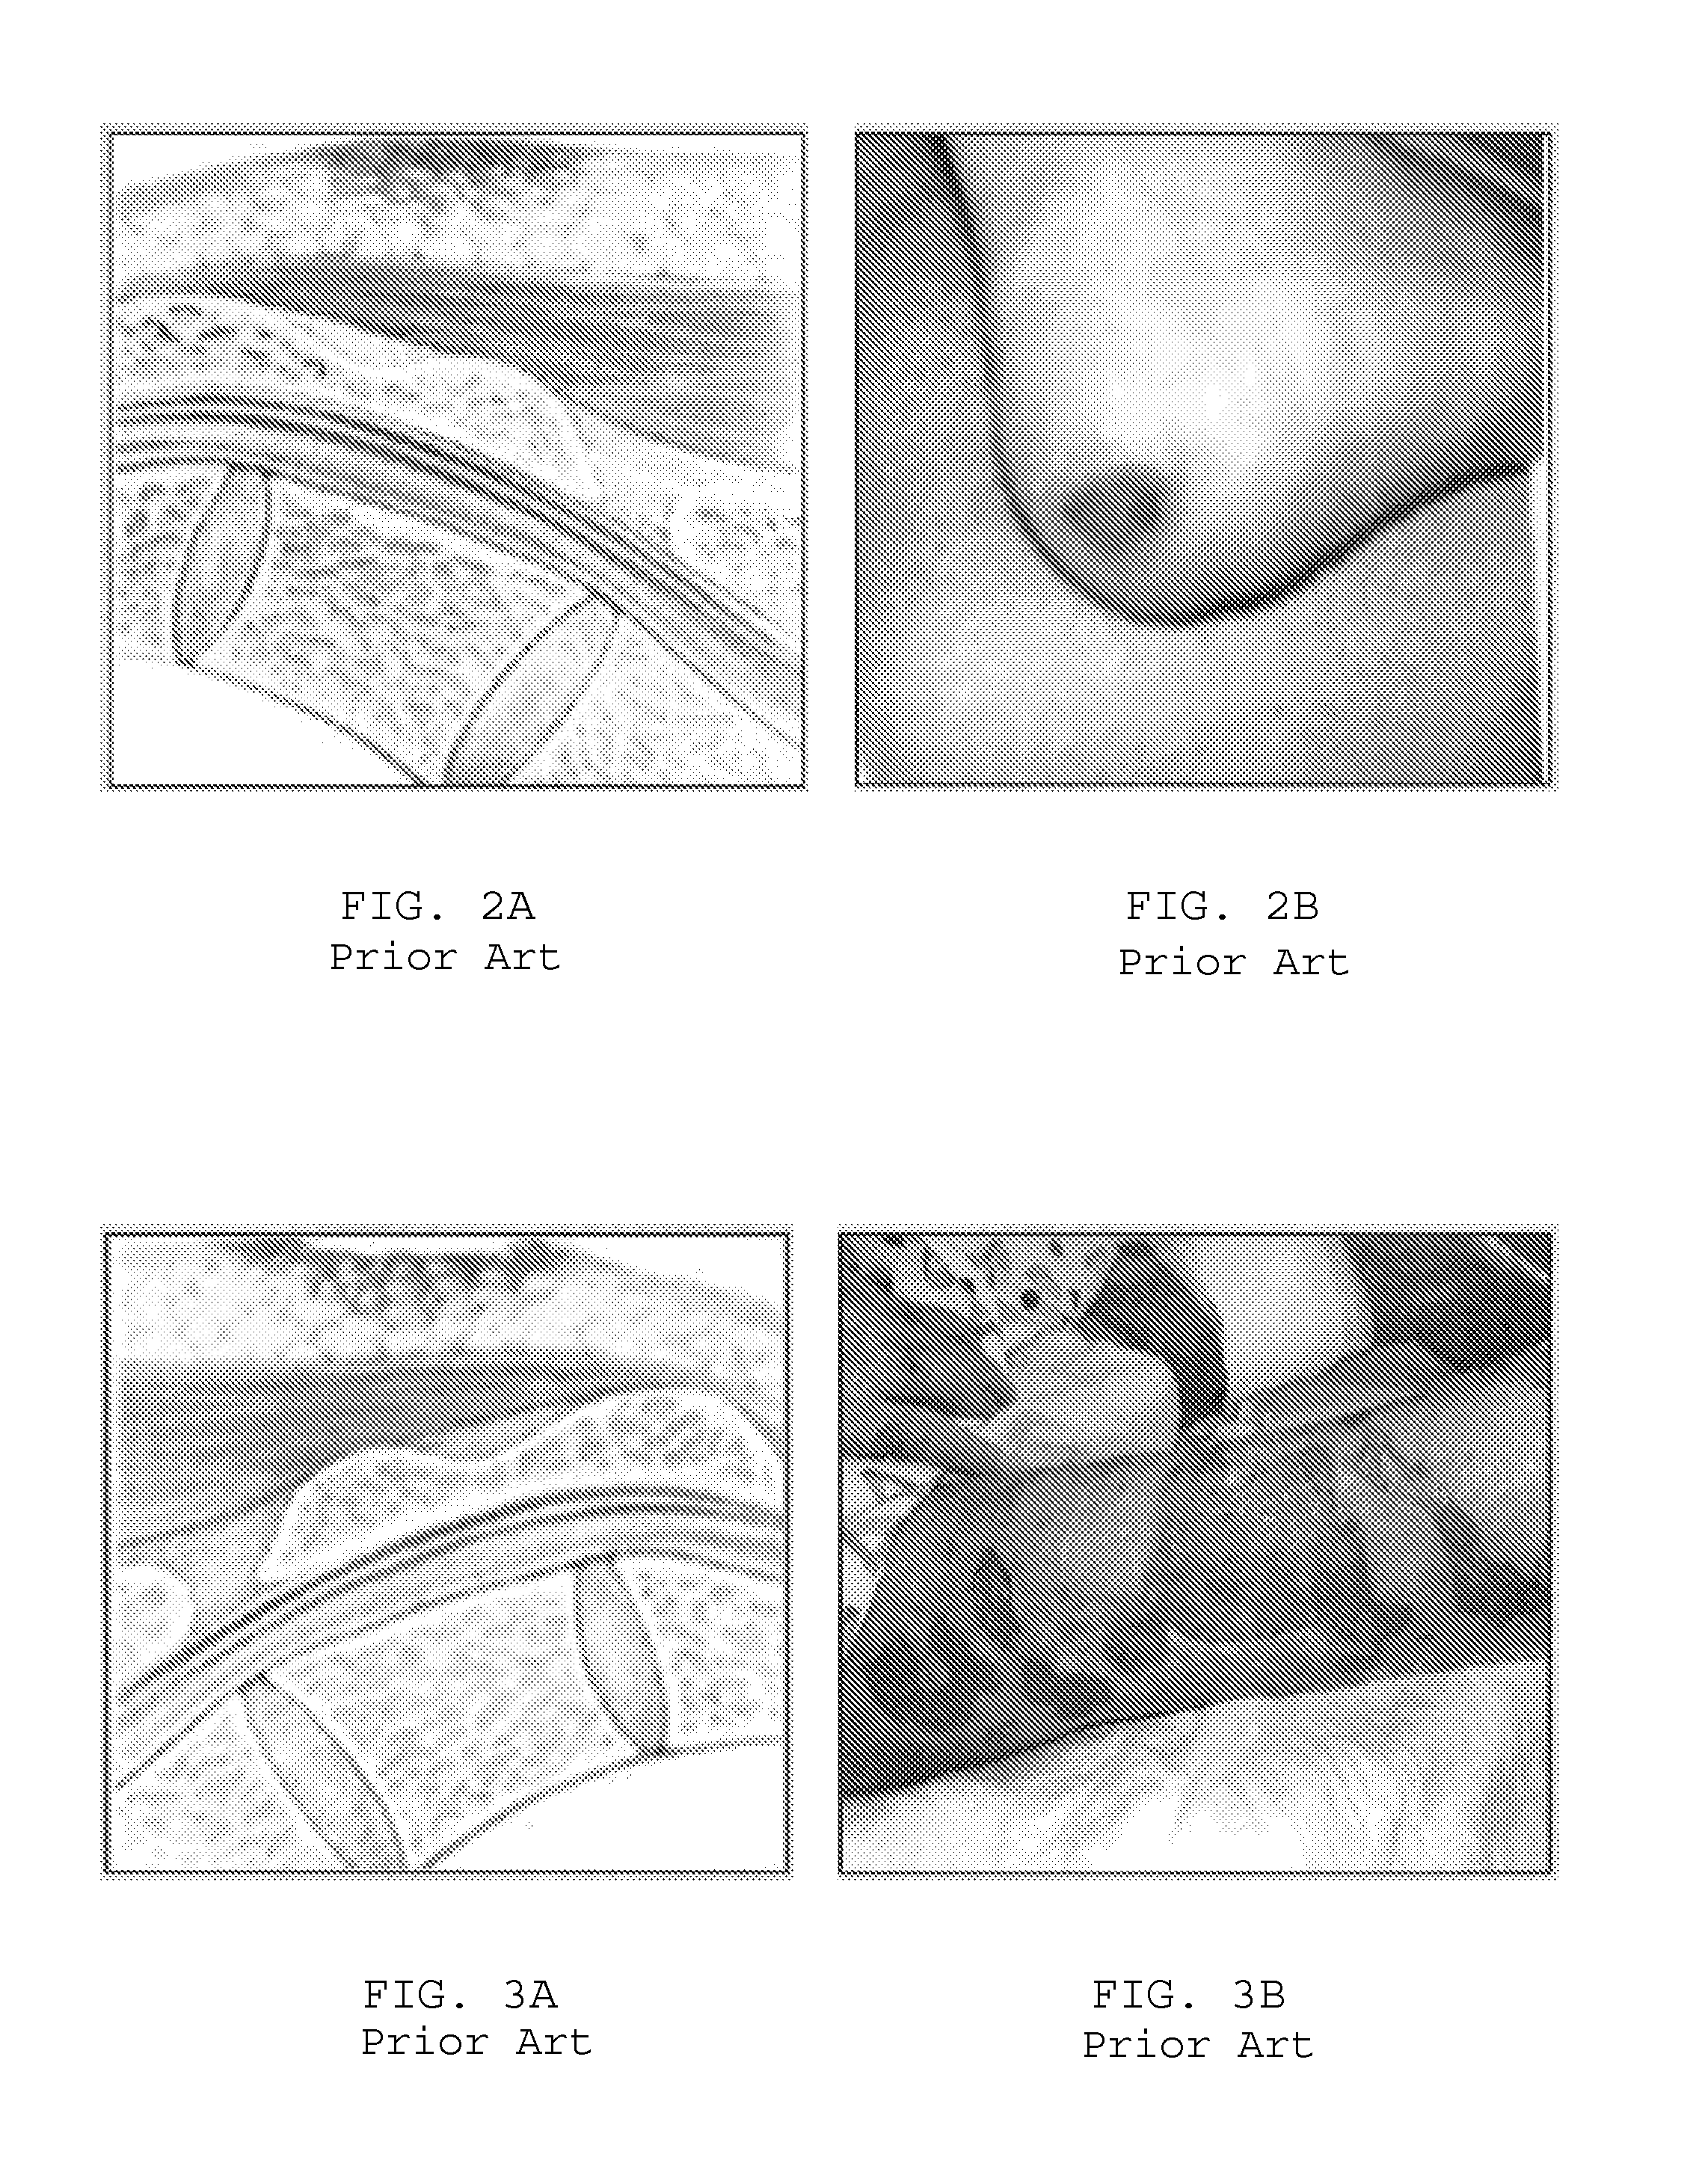 Systems for relieving pressure sores and methods therefor